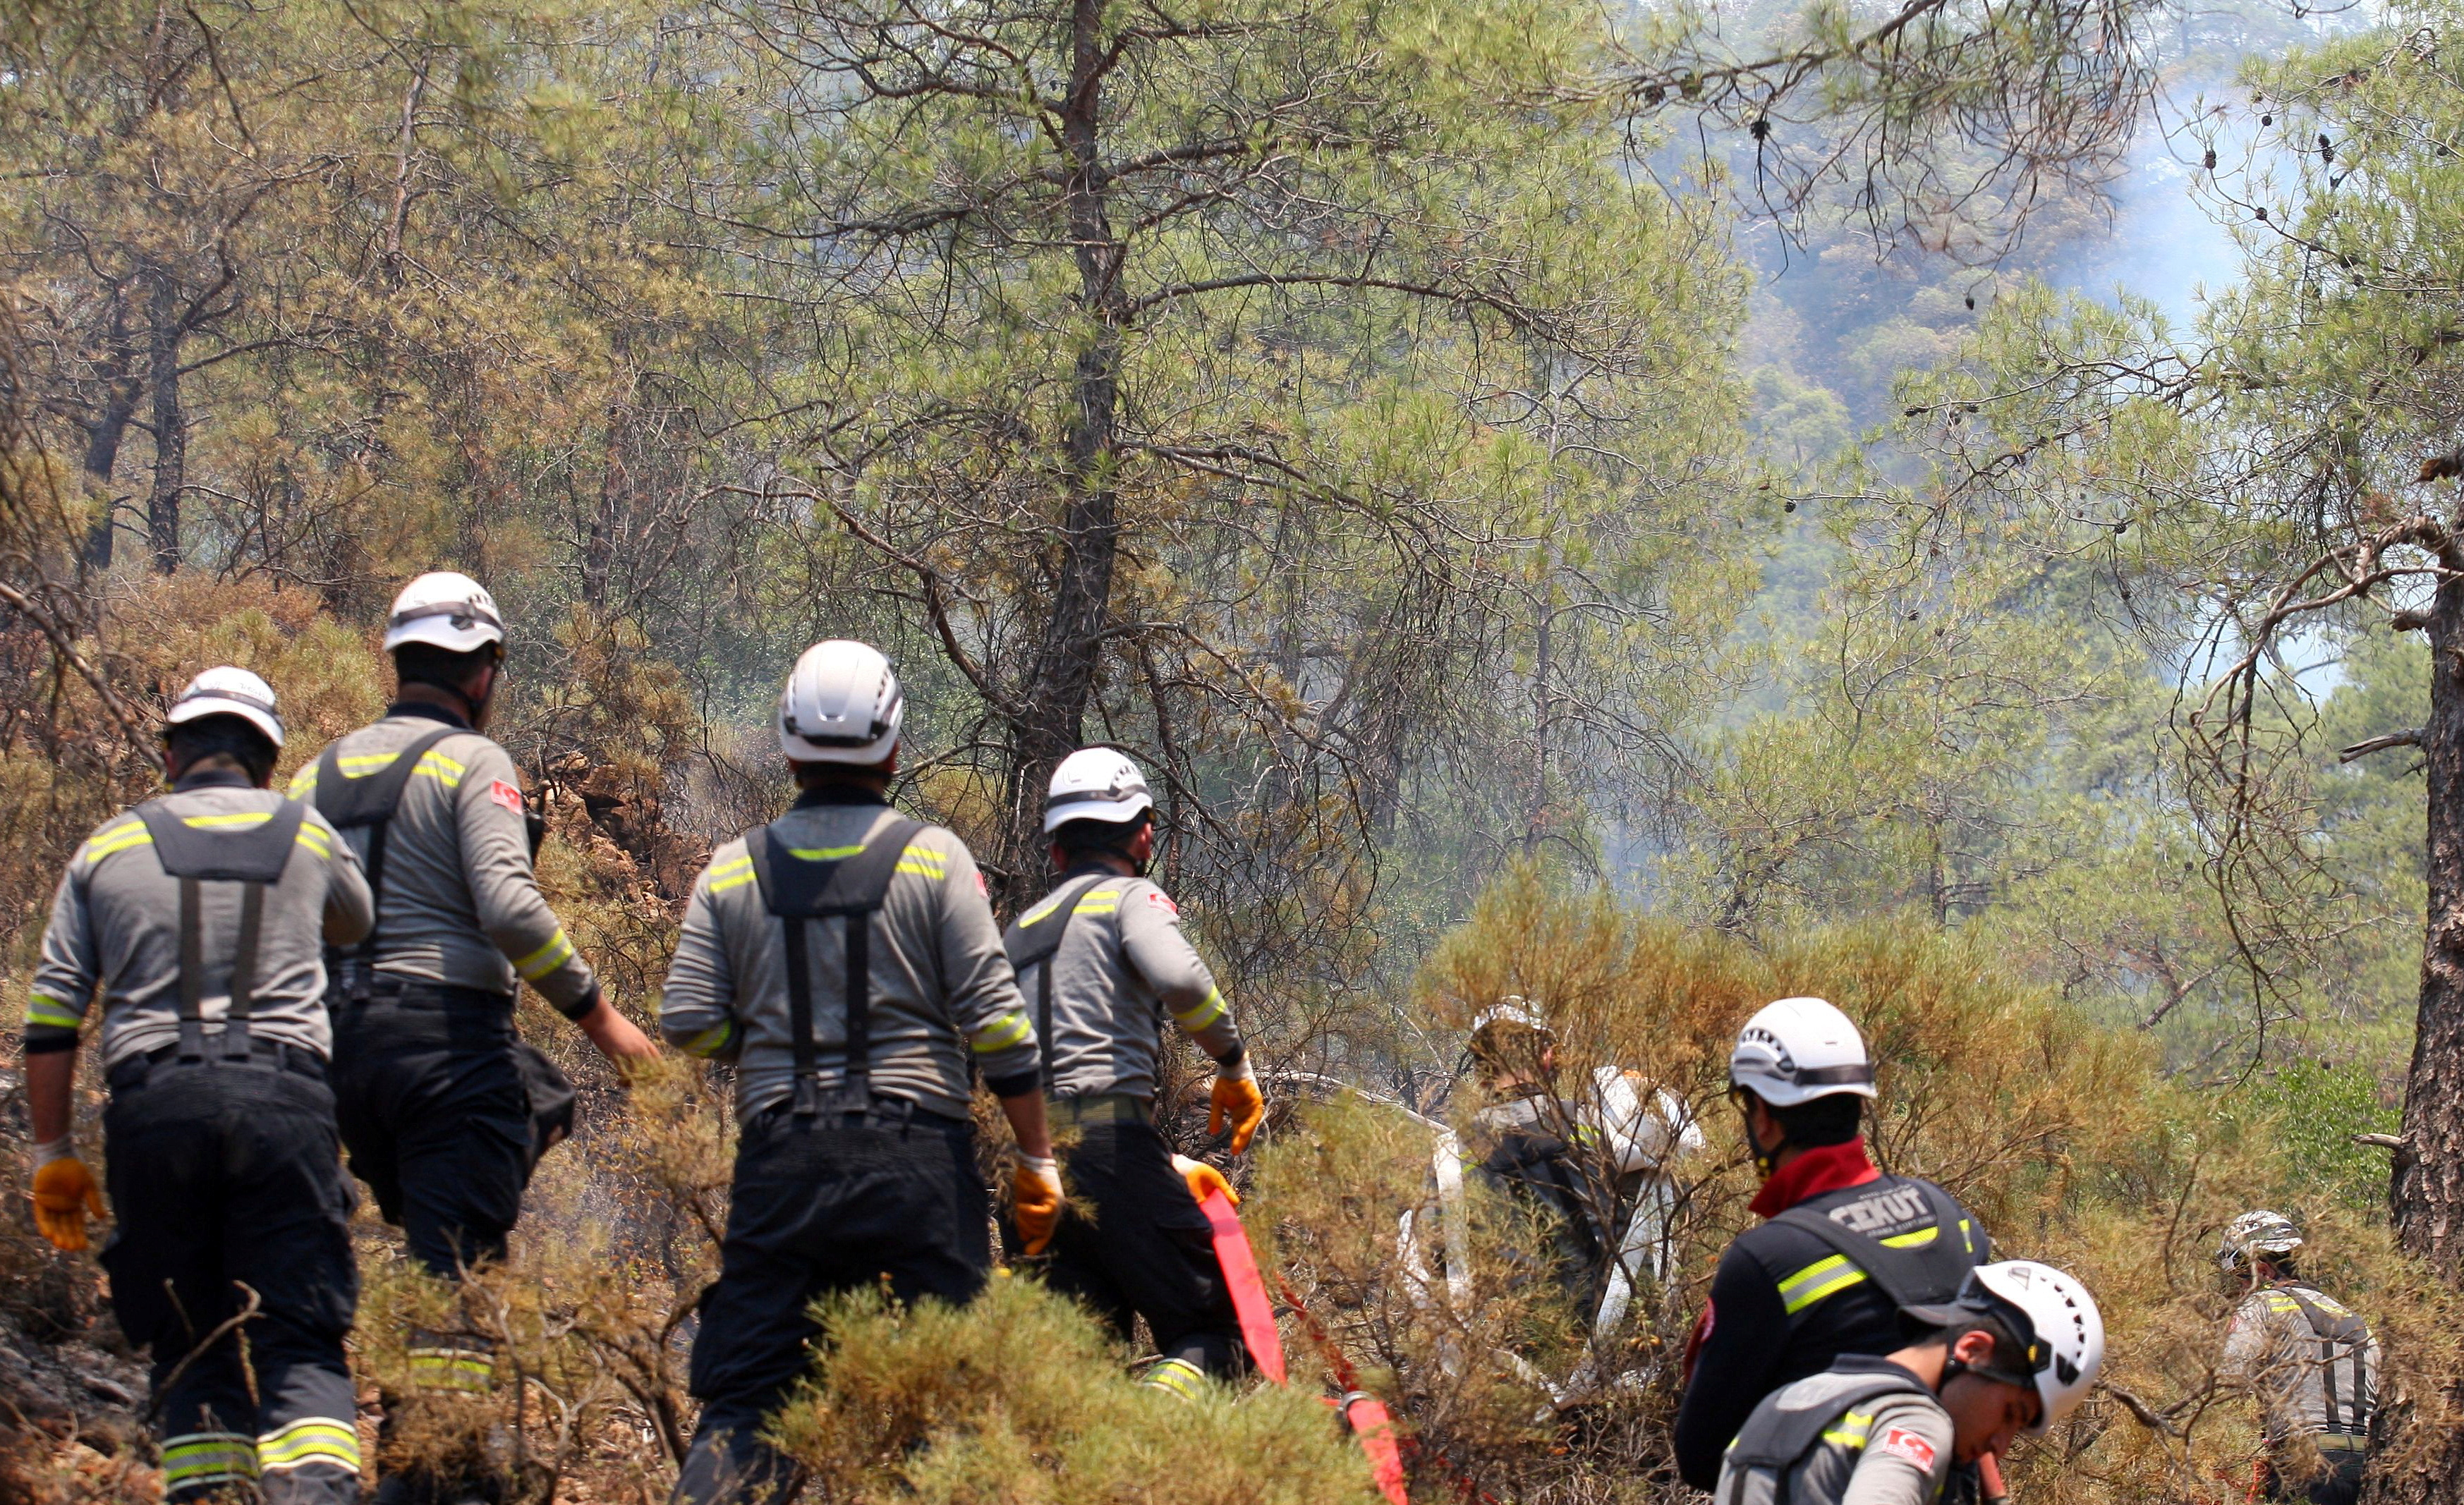 Firefighters work to extinguish a wildfire near Marmaris